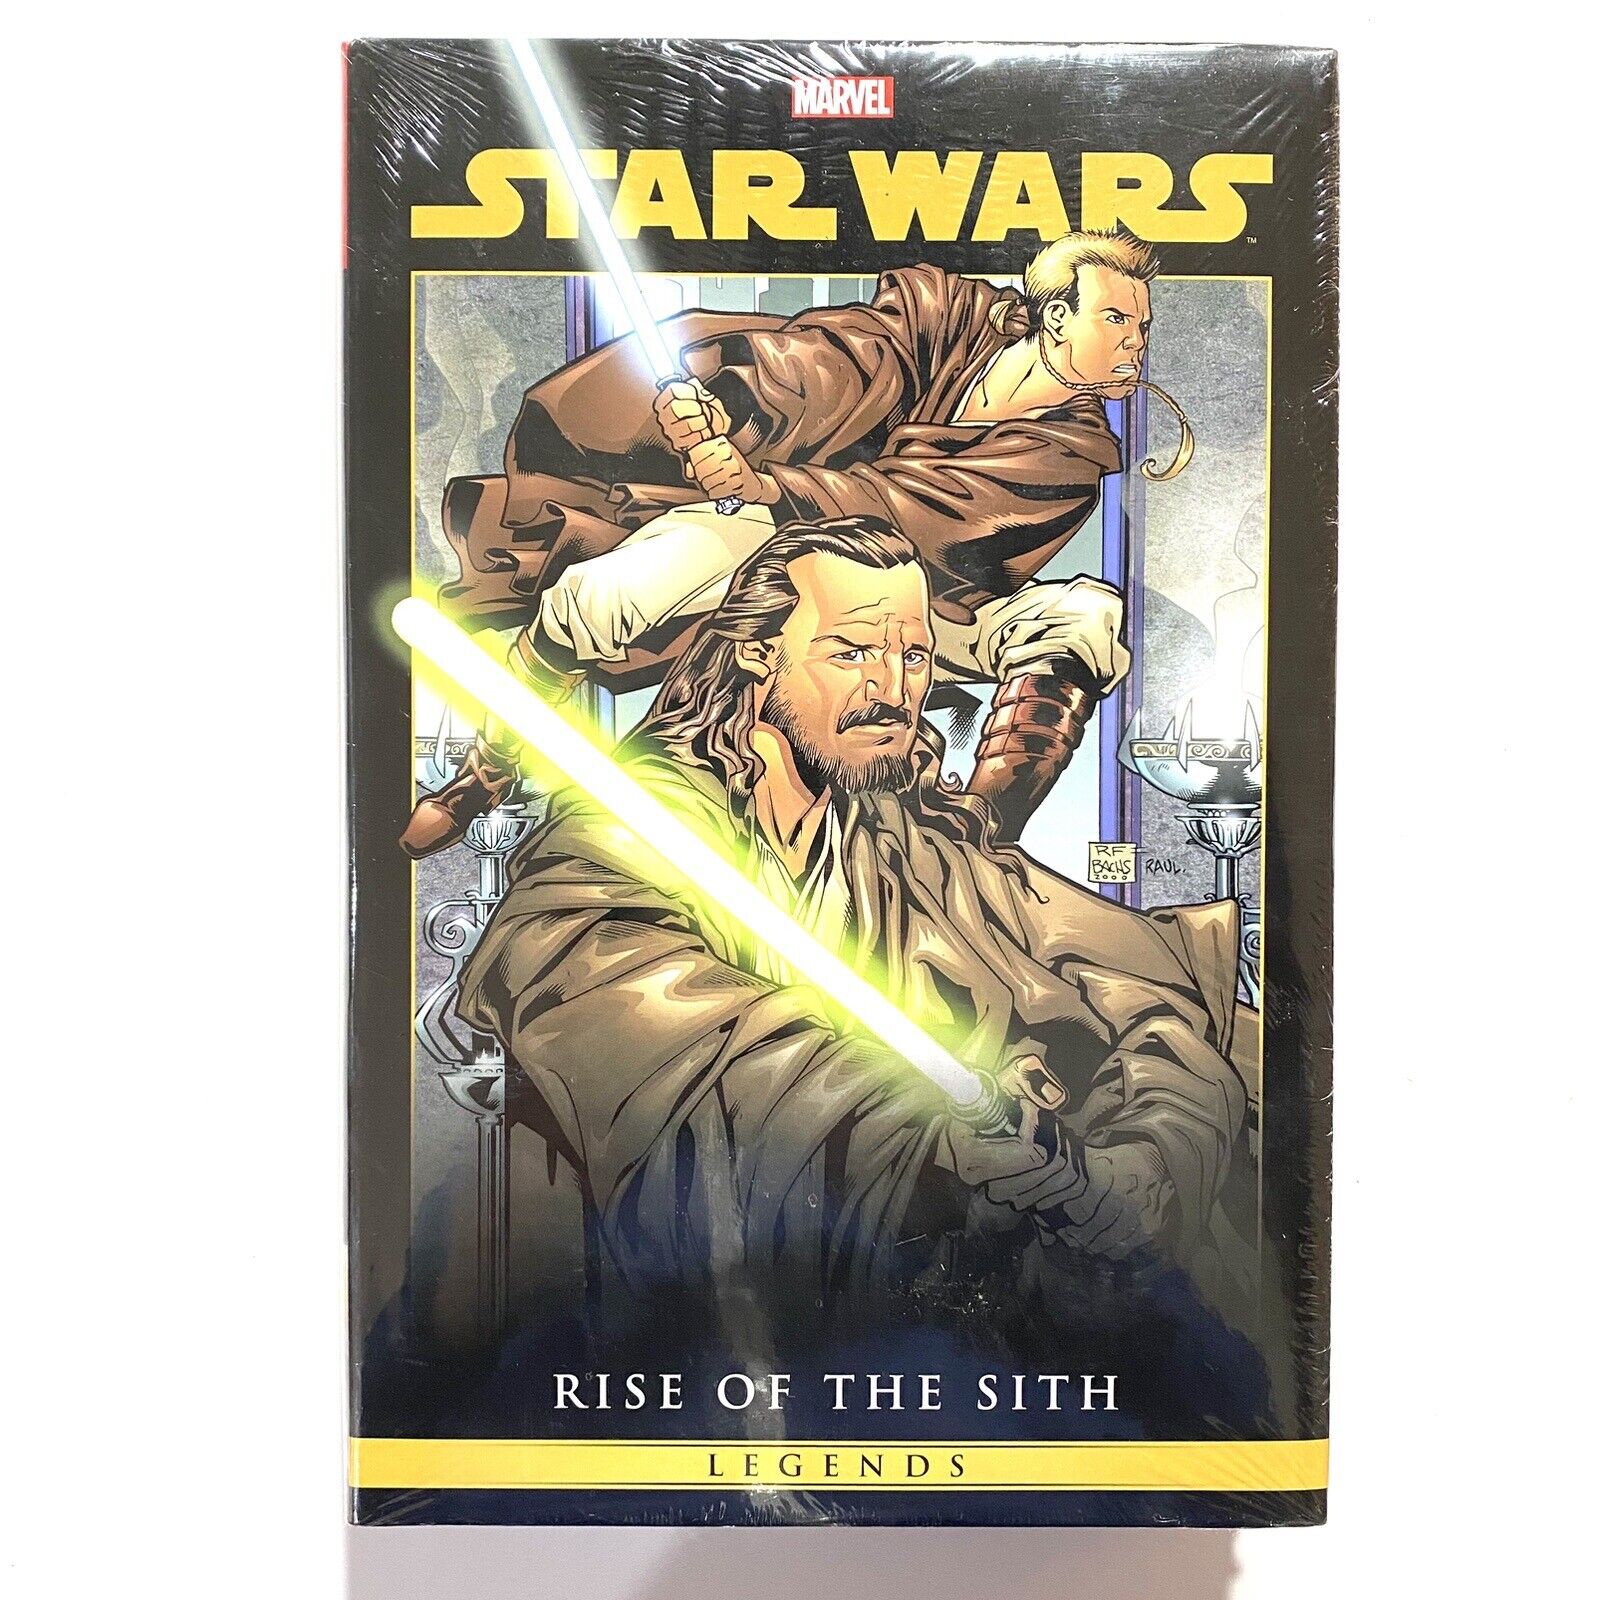 Star Wars Legends Rise Sith Omnibus New Ships From United States of America